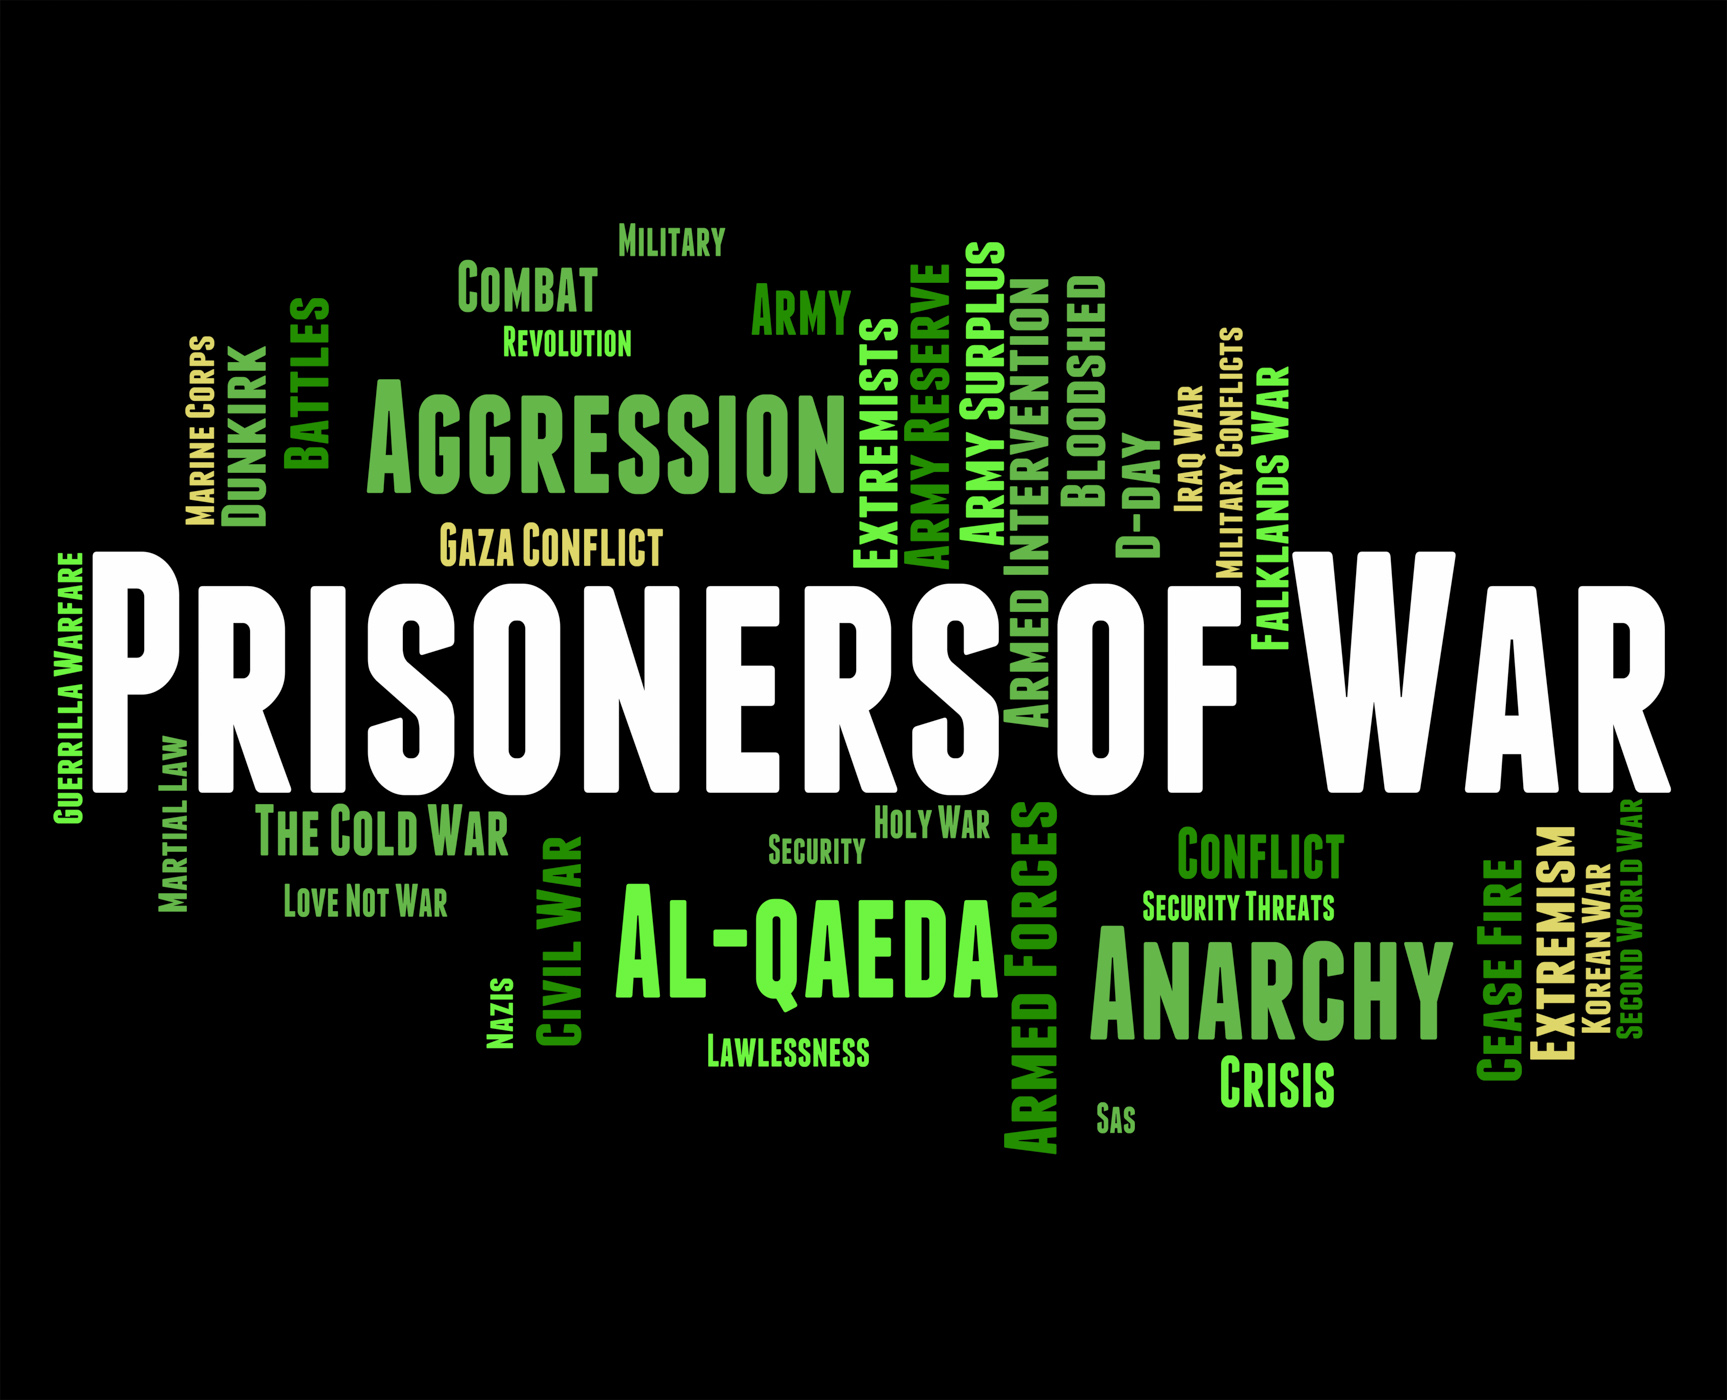 Prisoners of war shows military action and bloodshed photo